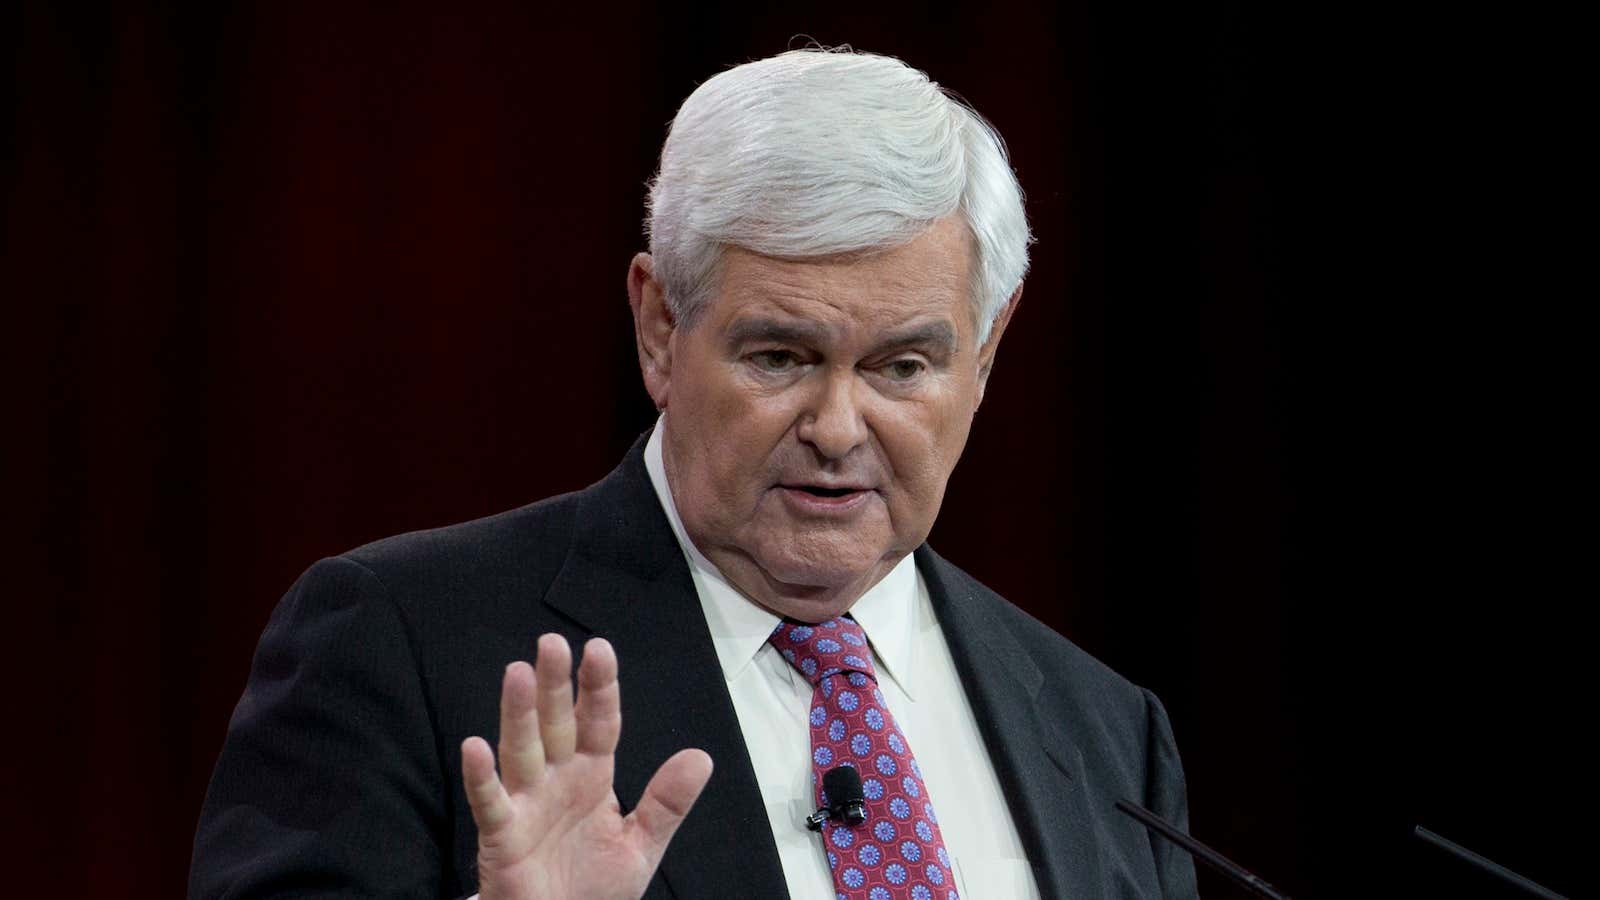 Gingrich seems to have forgotten that Republicans created the TSA.